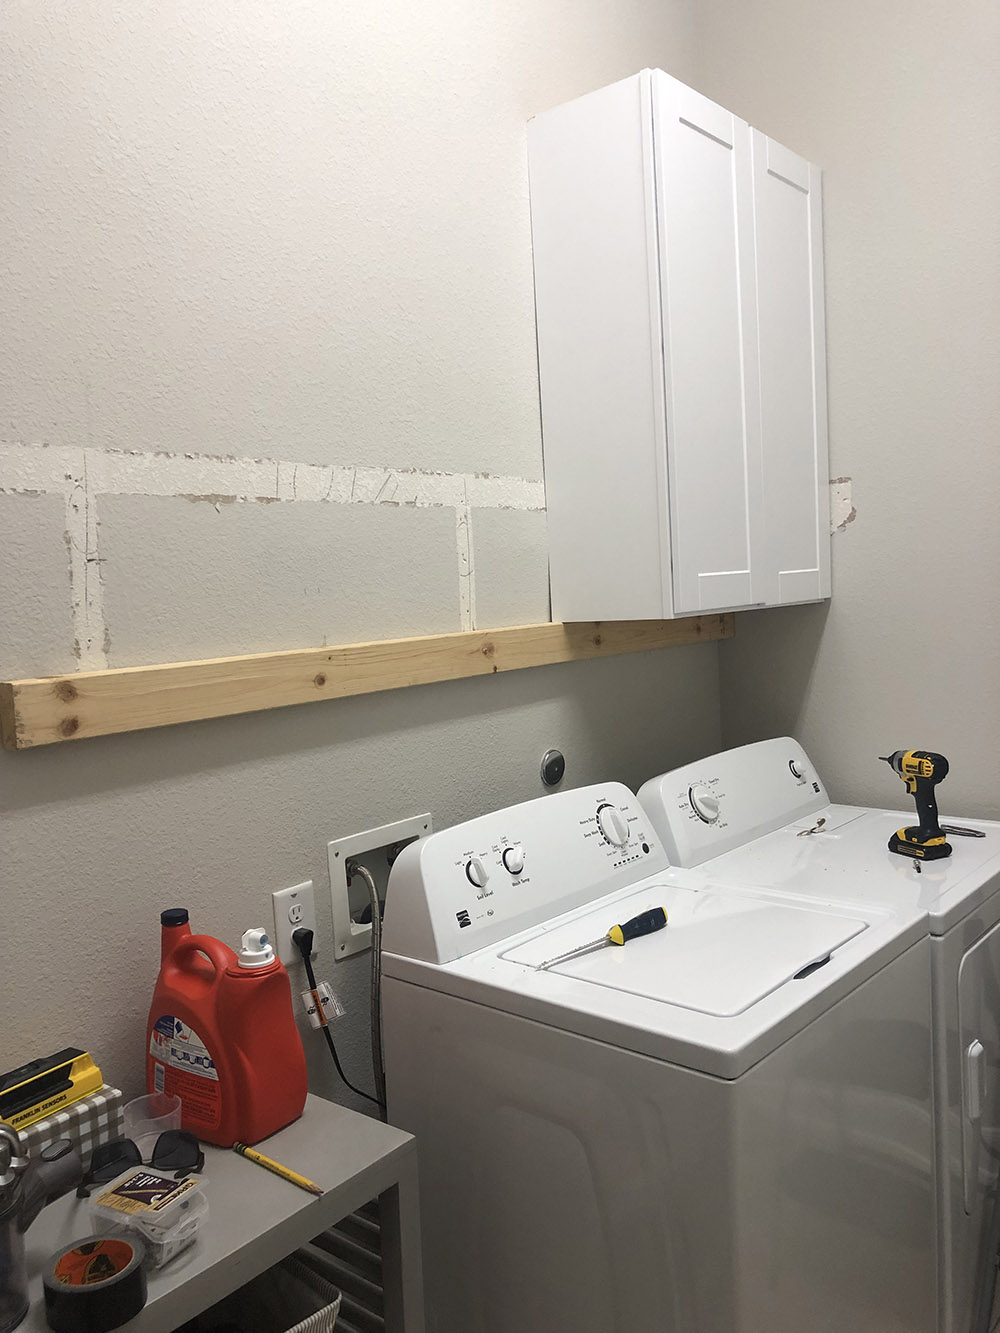 A laundry room with white wall cabinets being installed.